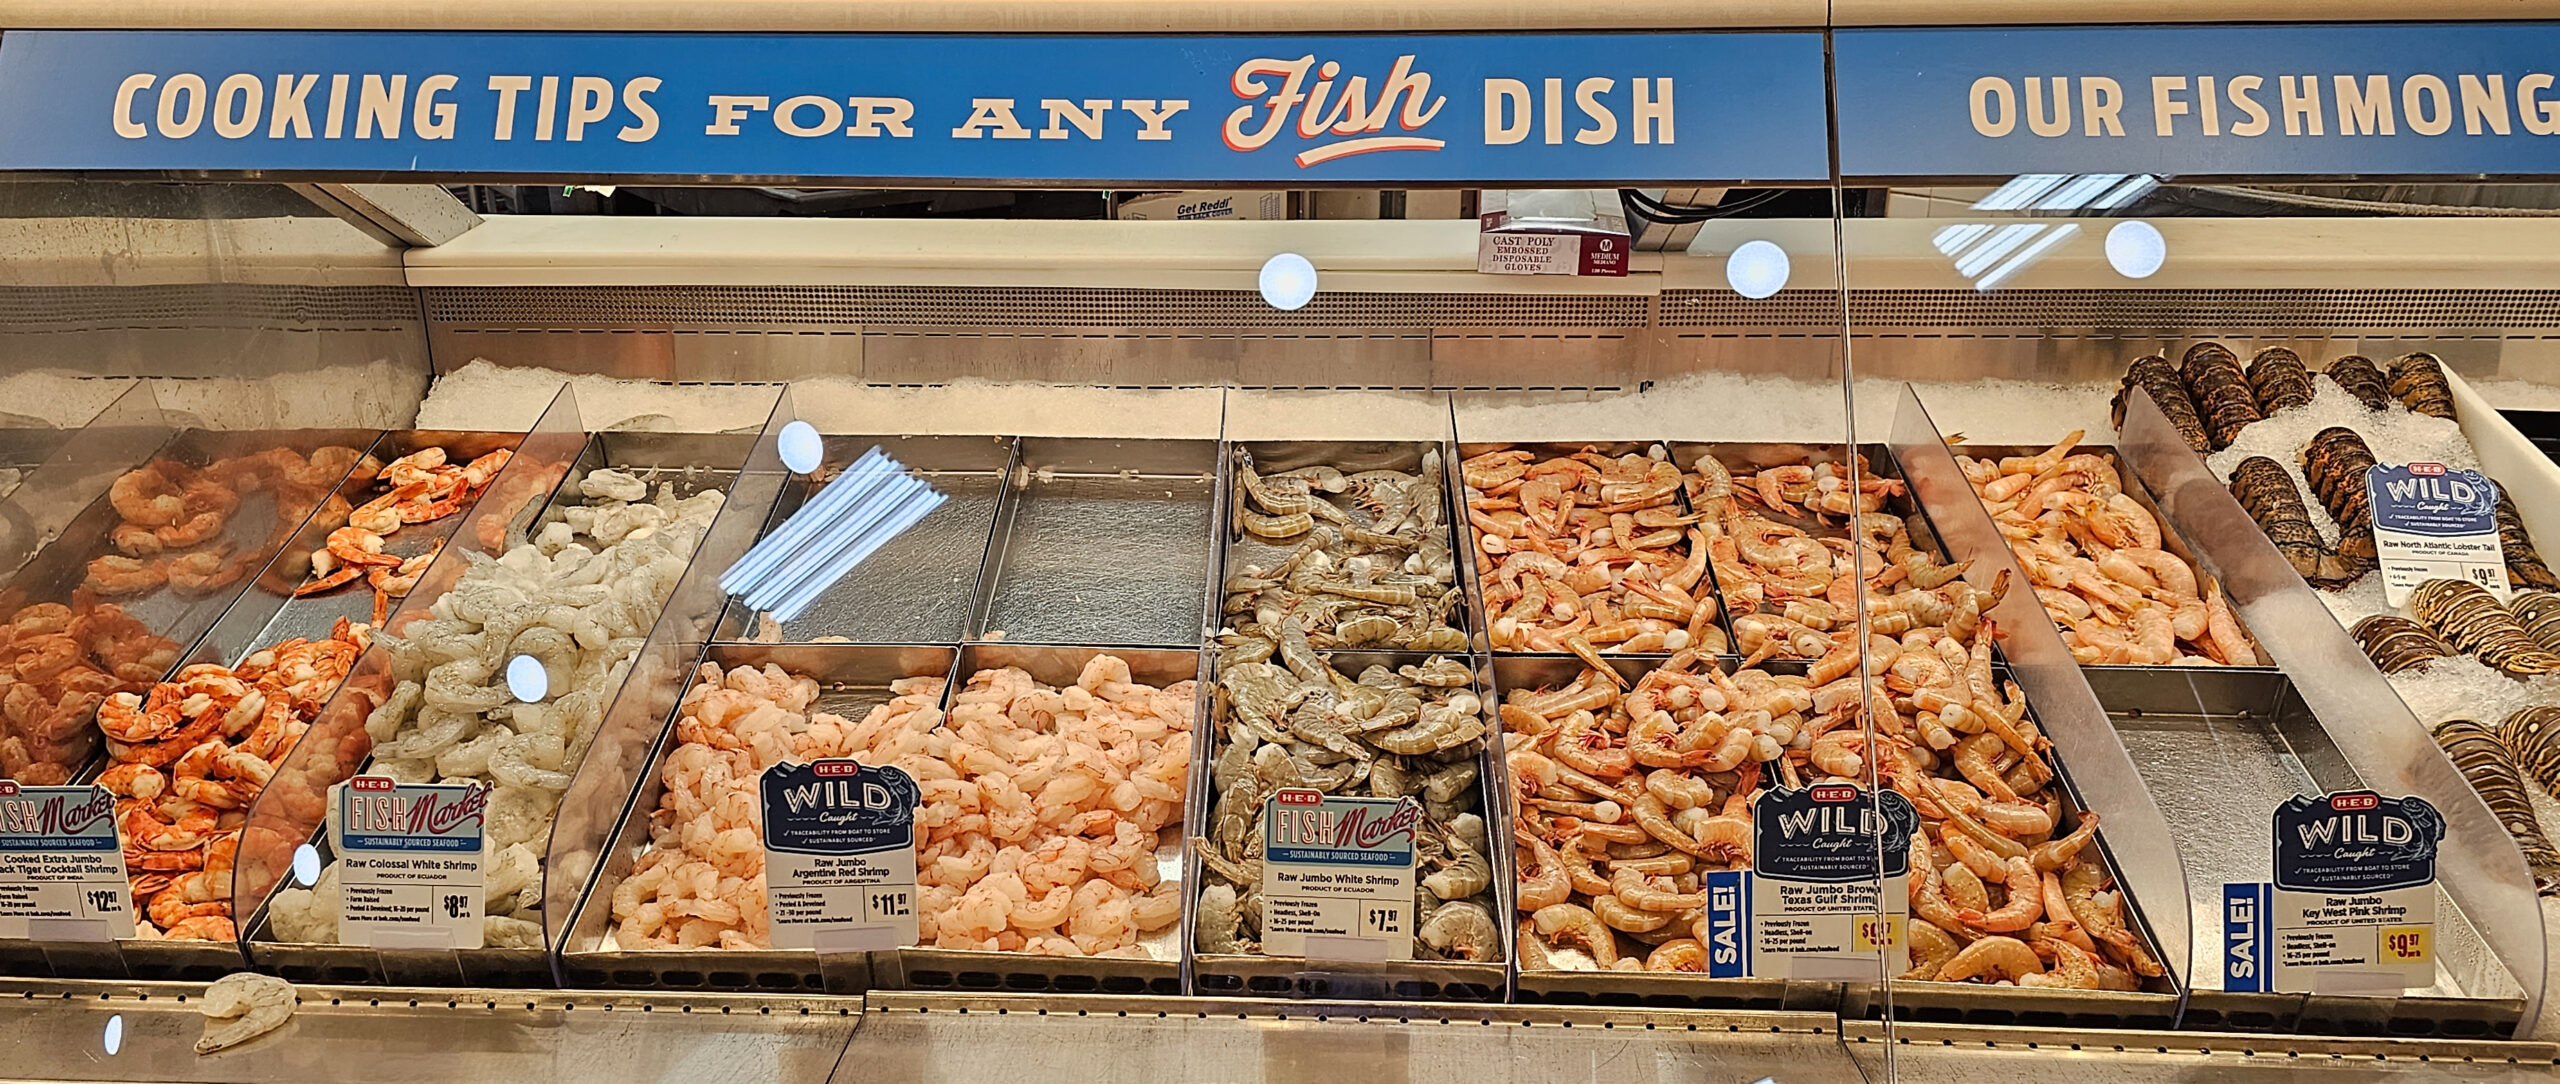 A refrigerated grocery store display of shrimp and seafood, with a sign reading Our Fishmongers have Cooking Tips for Any Fish Dish.